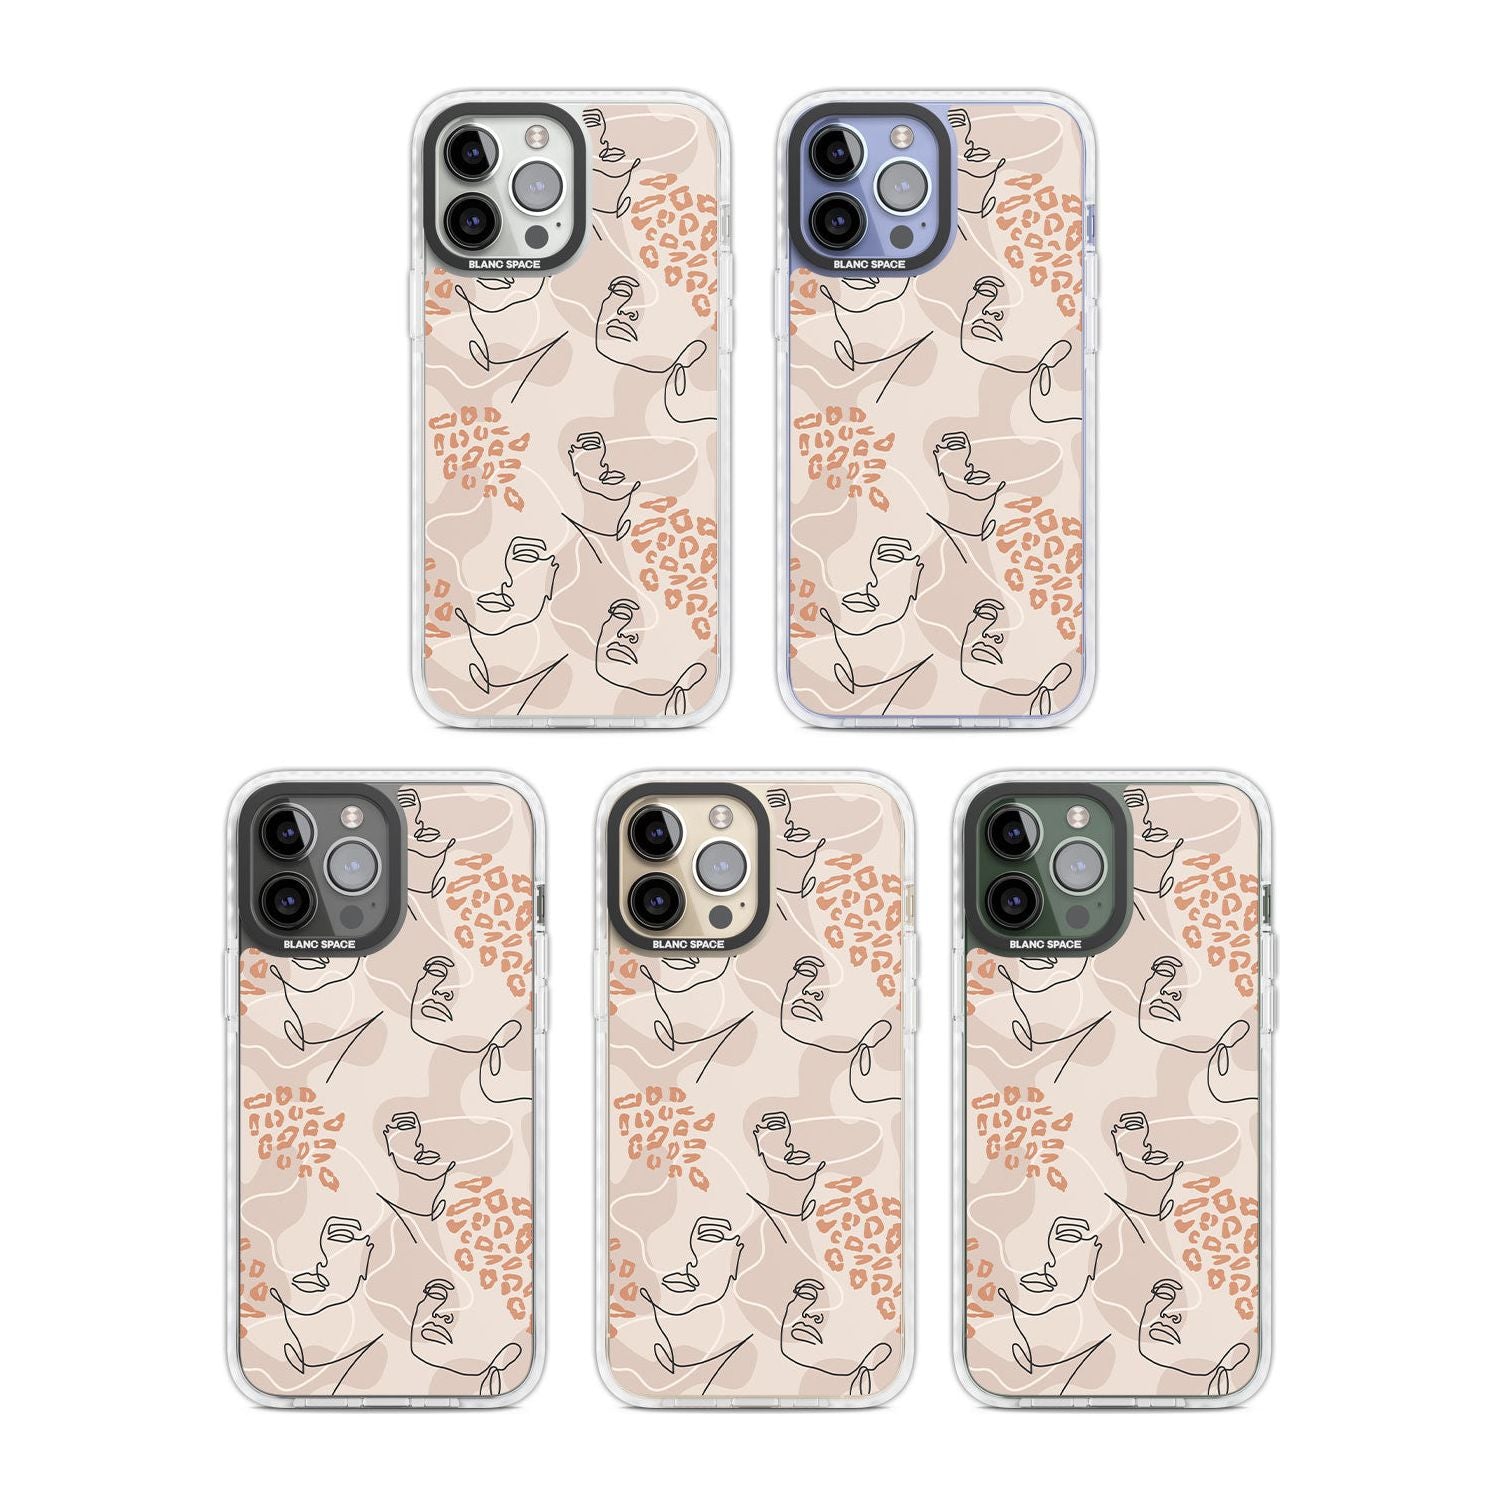 Leopard Print Stylish Abstract Faces Phone Case iPhone 15 Pro Max / Black Impact Case,iPhone 15 Plus / Black Impact Case,iPhone 15 Pro / Black Impact Case,iPhone 15 / Black Impact Case,iPhone 15 Pro Max / Impact Case,iPhone 15 Plus / Impact Case,iPhone 15 Pro / Impact Case,iPhone 15 / Impact Case,iPhone 15 Pro Max / Magsafe Black Impact Case,iPhone 15 Plus / Magsafe Black Impact Case,iPhone 15 Pro / Magsafe Black Impact Case,iPhone 15 / Magsafe Black Impact Case,iPhone 14 Pro Max / Black Impact Case,iPhone 